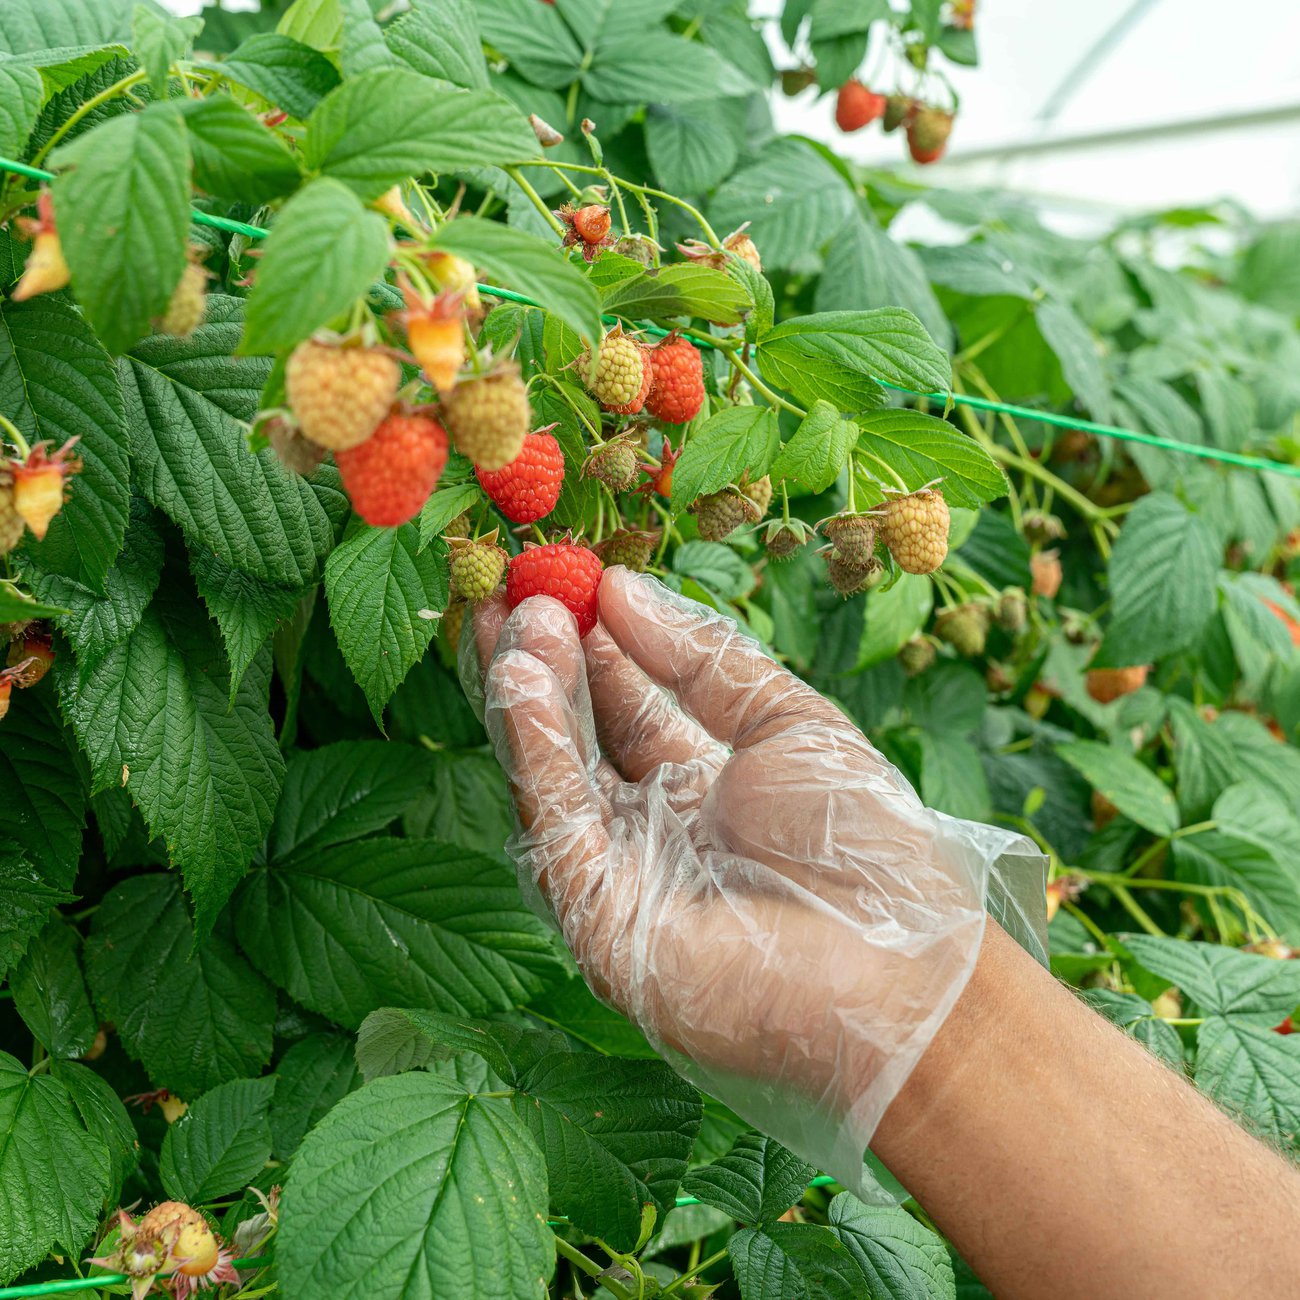 Pickers have to be extra careful while handling this delicate berry